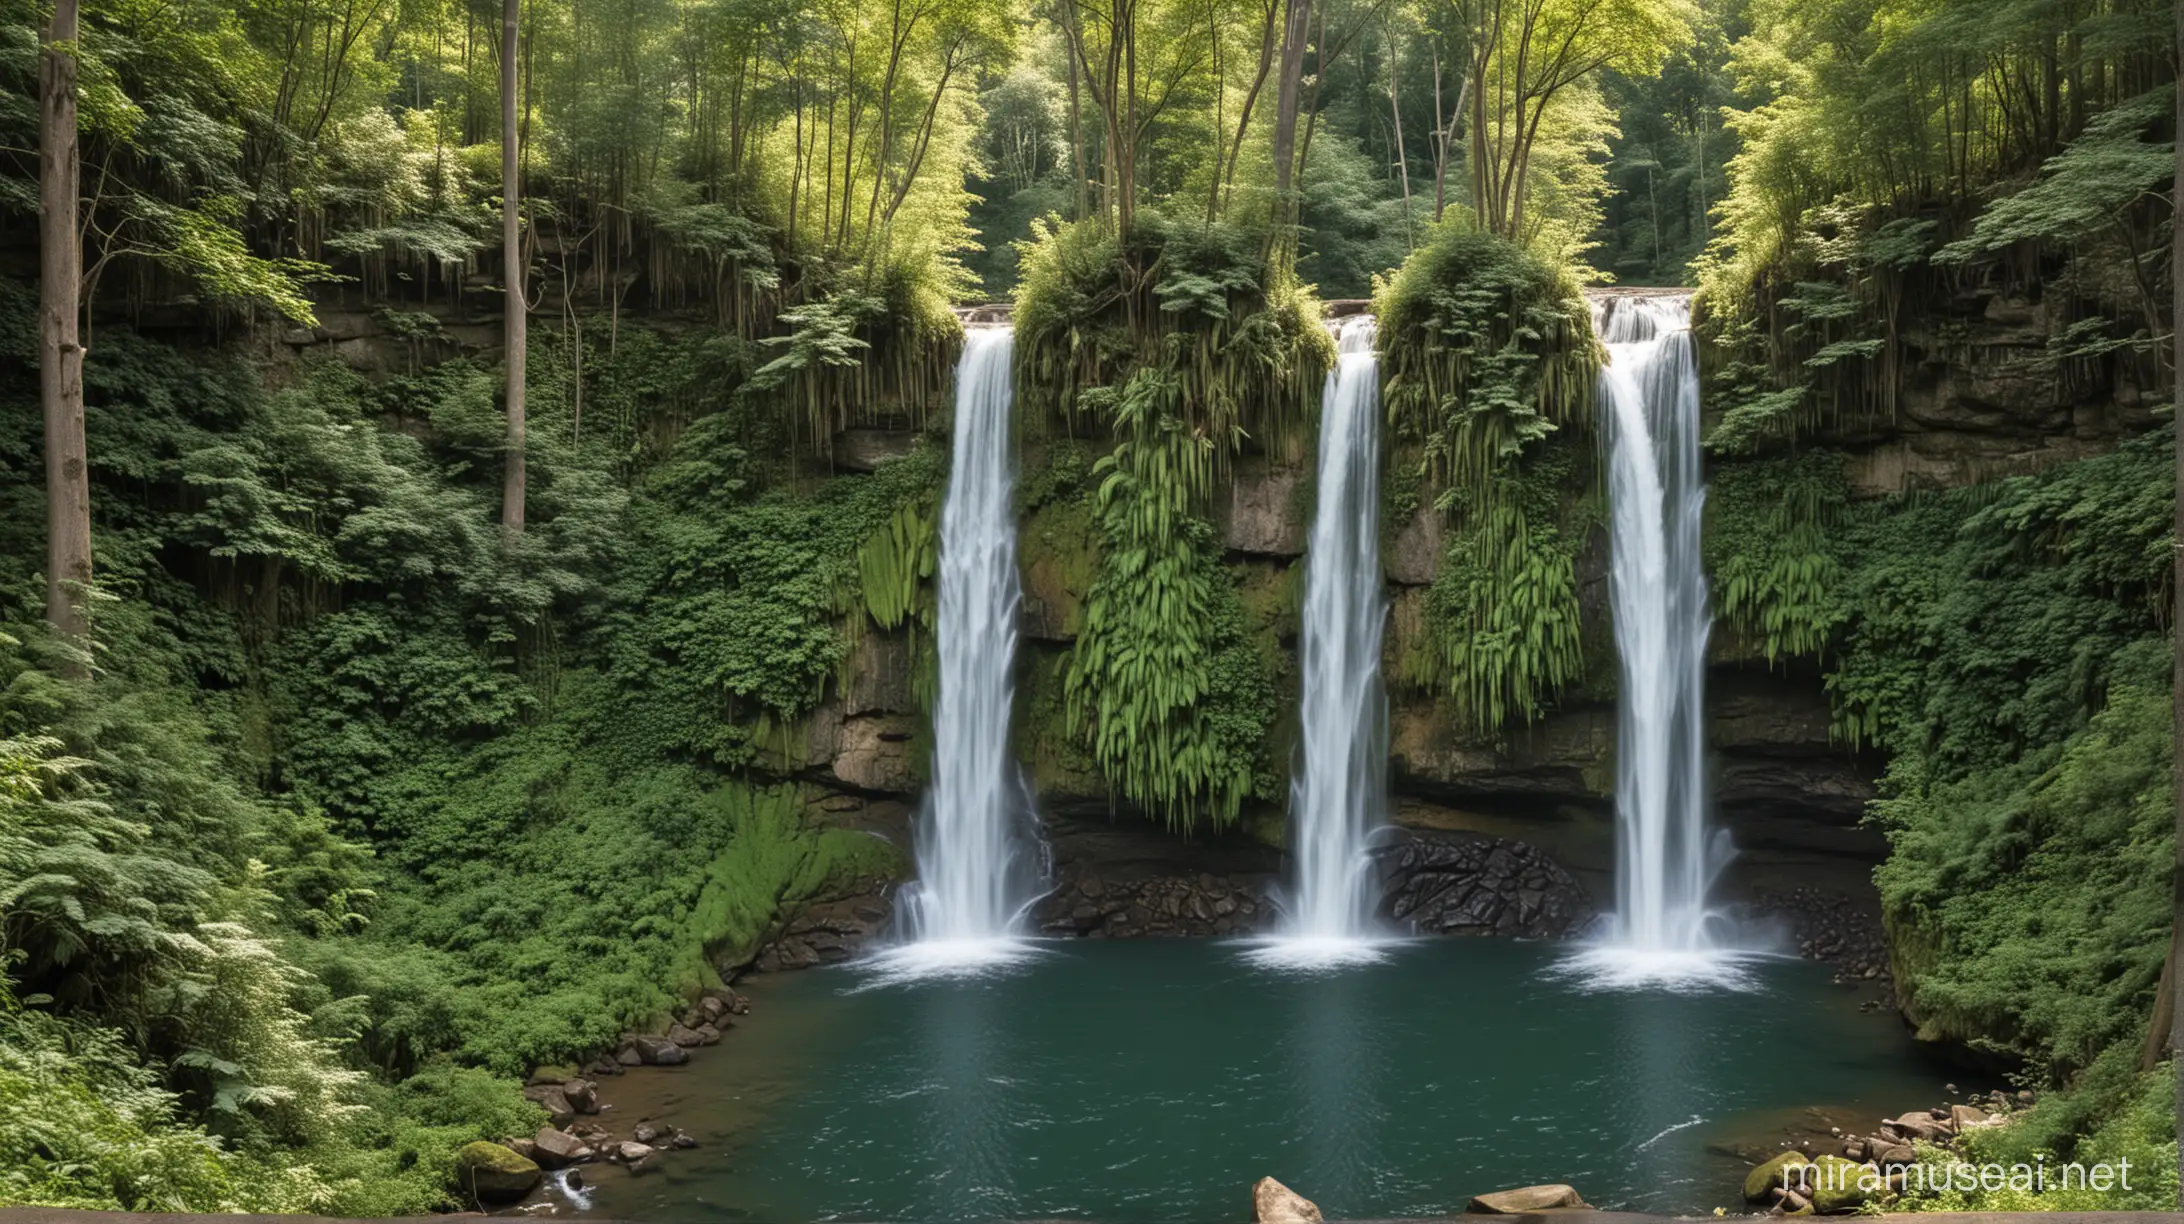 Spectacular Dual Waterfalls Cascading Through Lush Forest Canopy